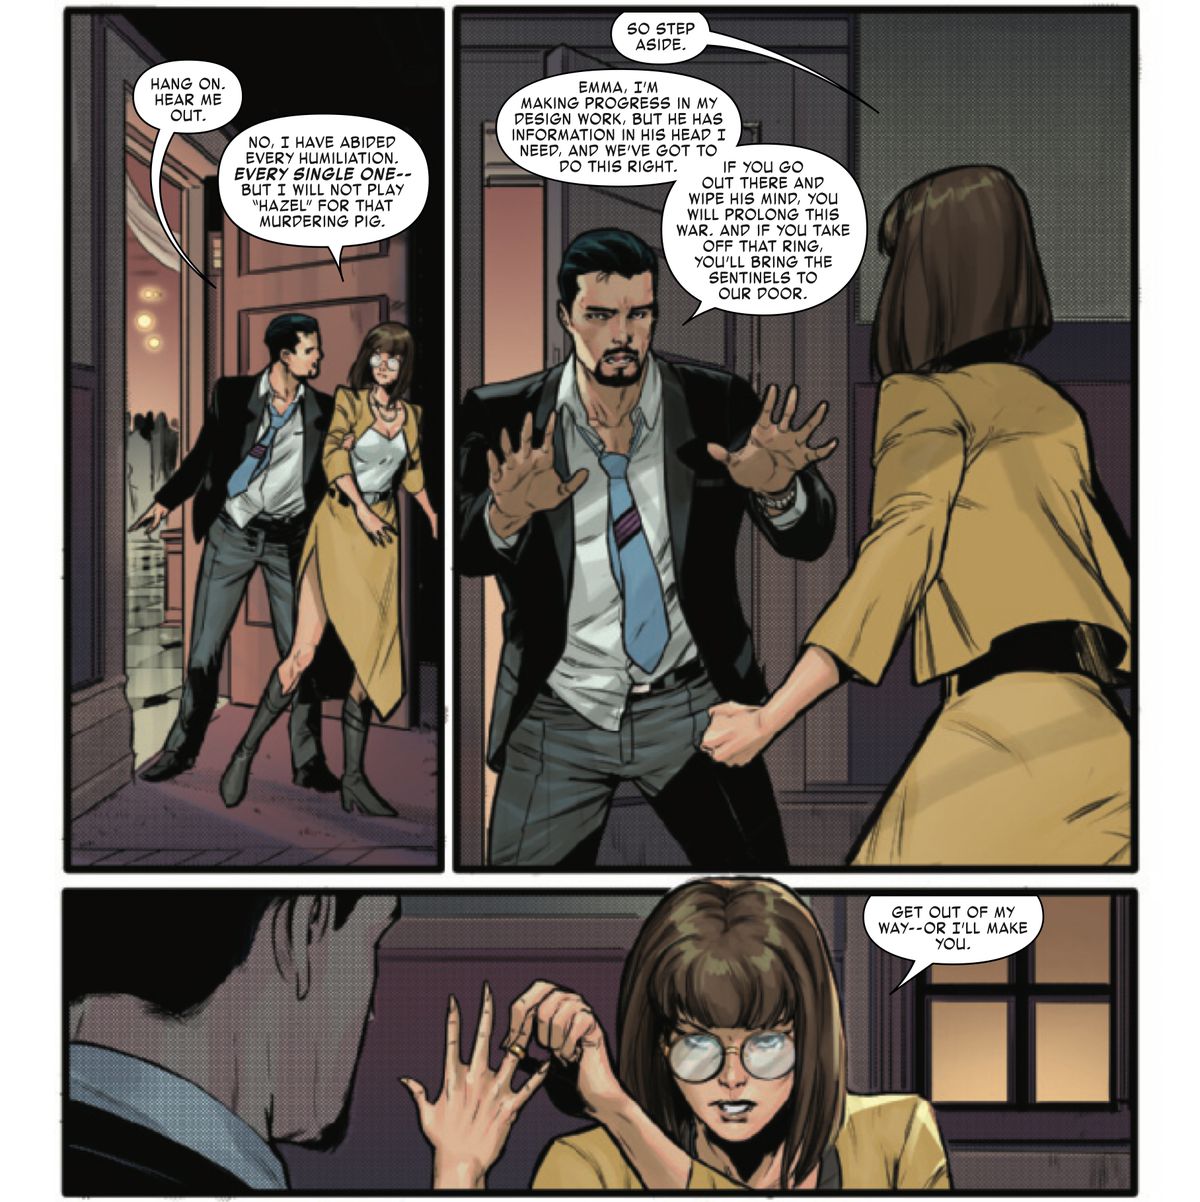 Tony Stark and a disguised Emma Frost argue alone in a hallway. Tony attempts to convince her that if she takes off her power dampening ring to wipe Feilong’s mind, they’ll lose valuable intel and Sentinels will be alerted. “Get out of my way,” she says, pulling off the ring, “or I’ll make you,” in Invincible Iron Man #10. 